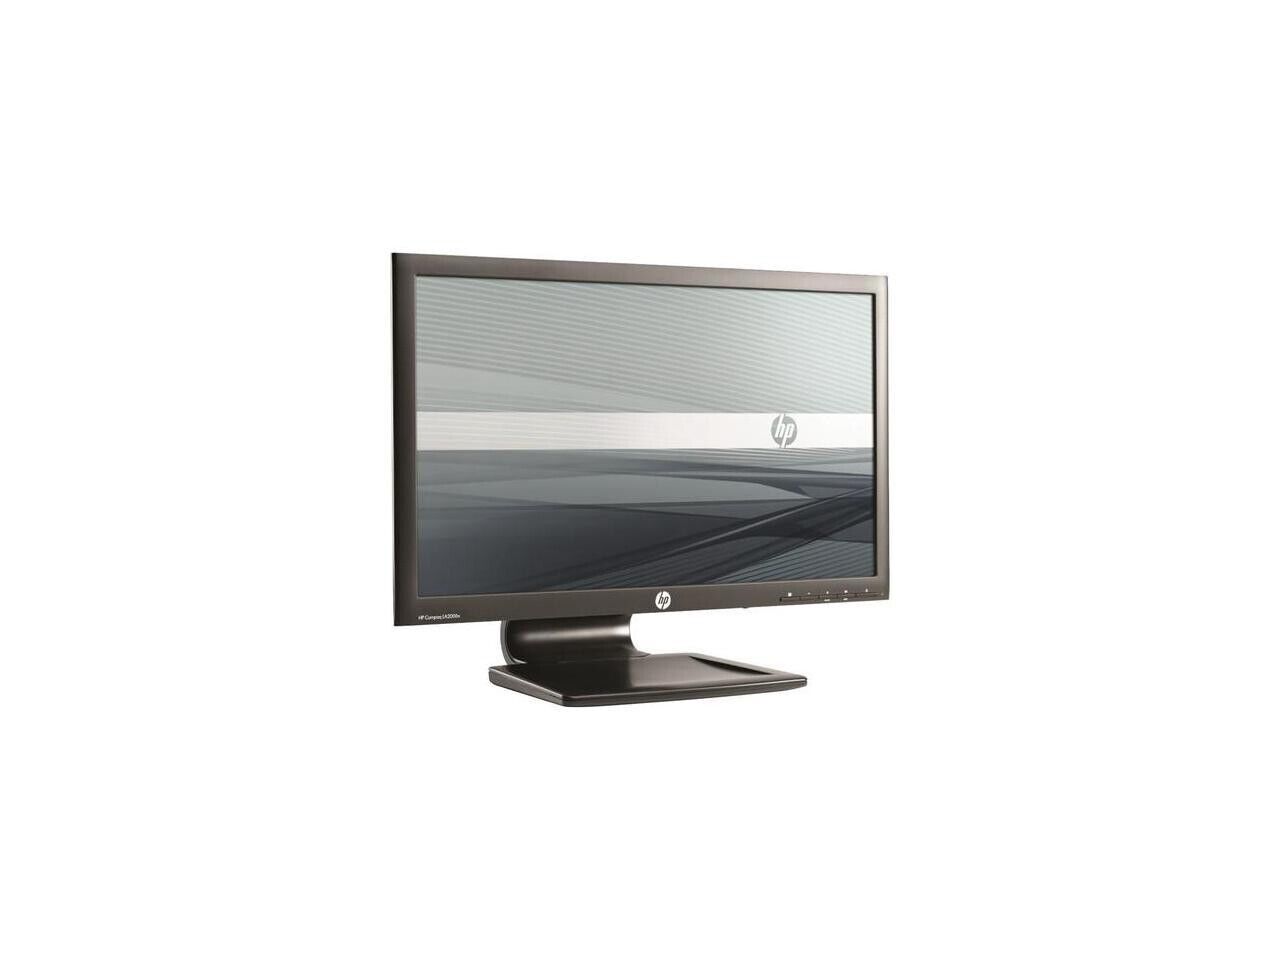 HP Compaq LA2006x 20in Monitor | Used | Stand Not included